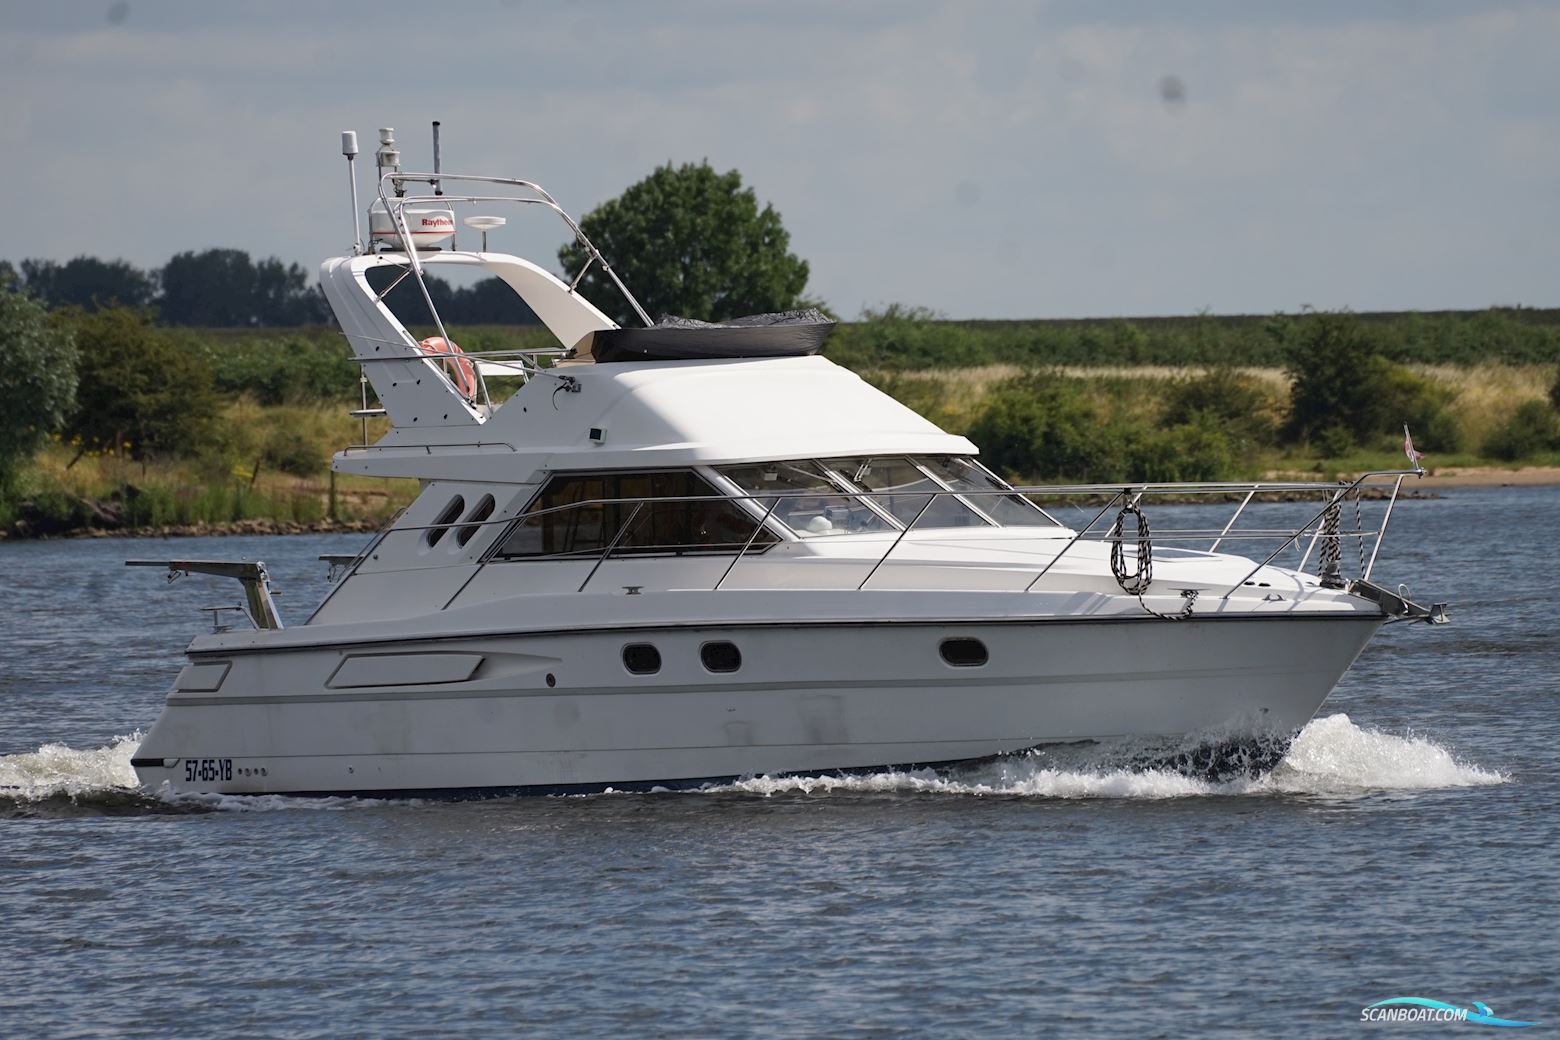 Fairline 37 Corsica Motor boat 1992, with Volvo Penta engine, The Netherlands